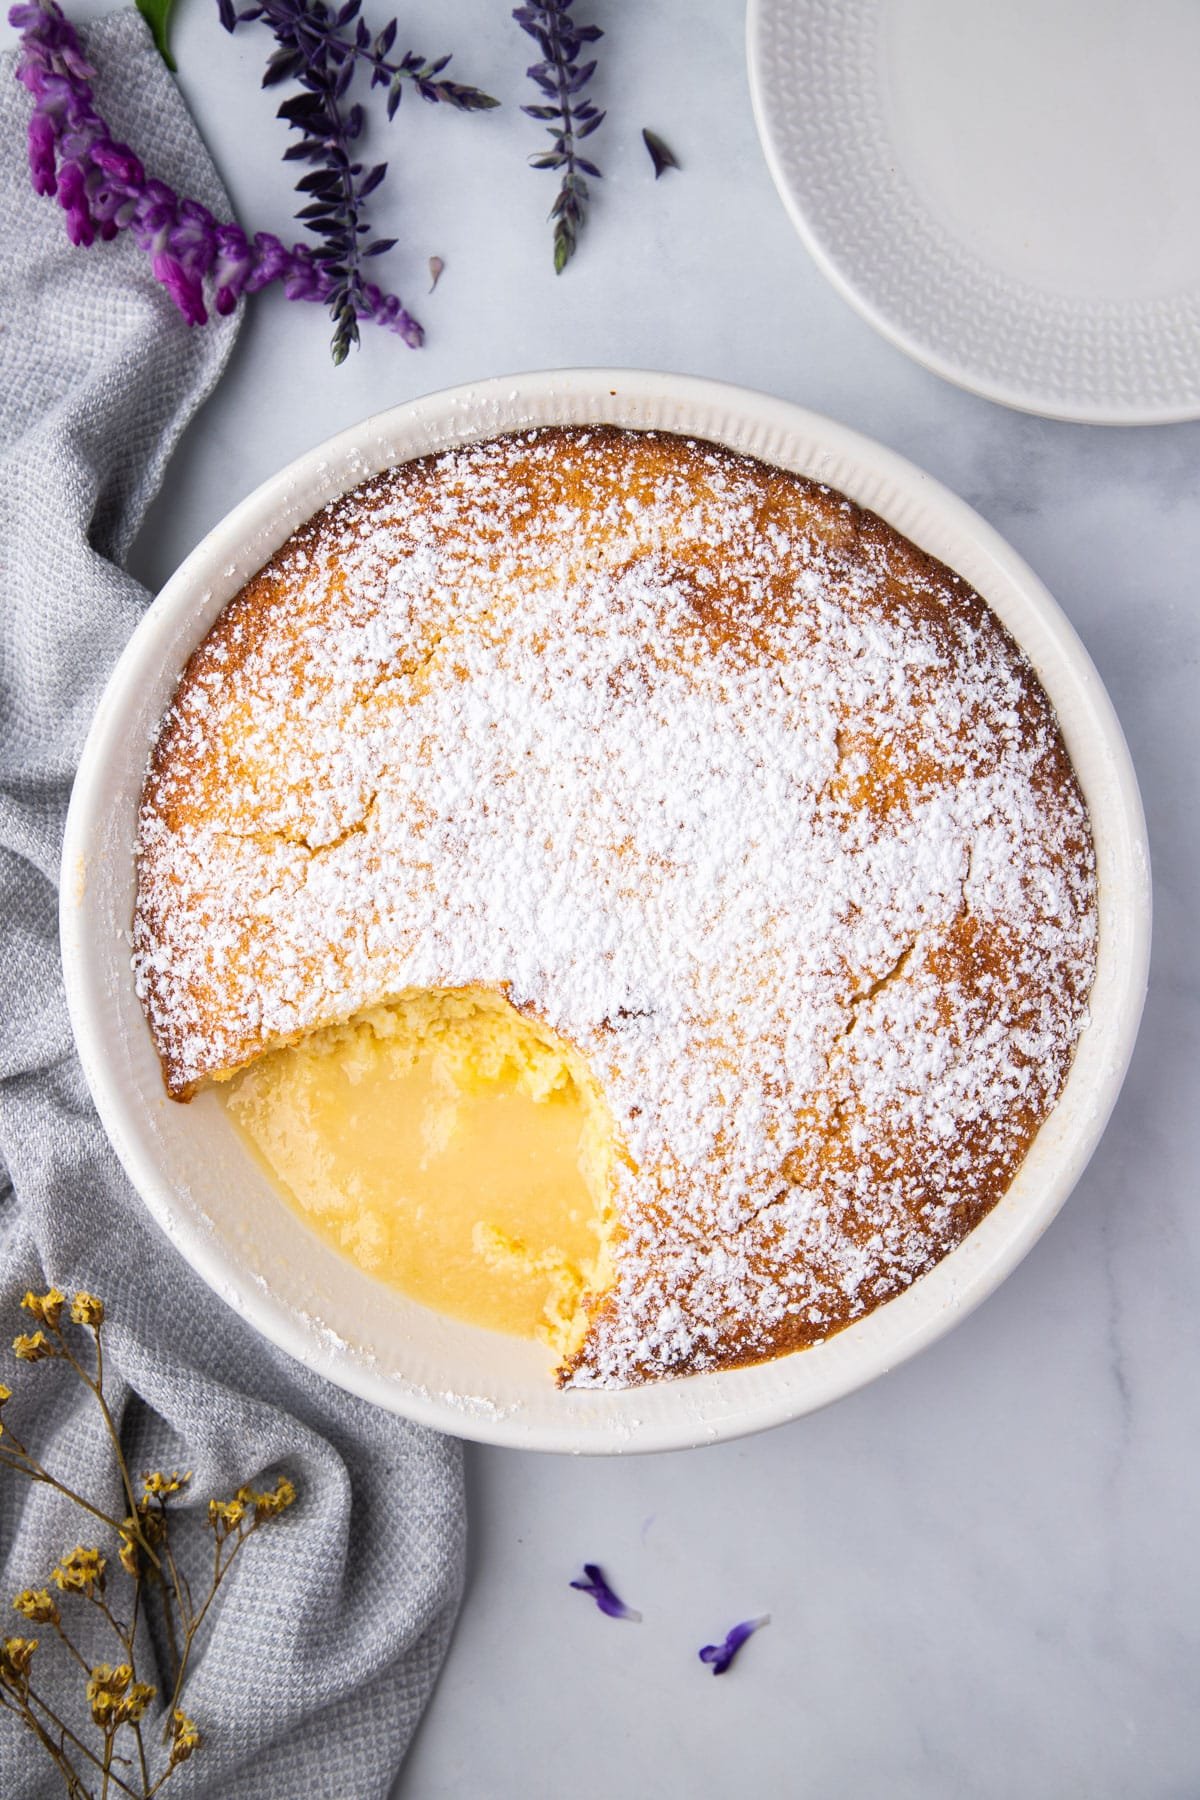 lemon sponge pudding in a large white dish, surrounded by flowers.